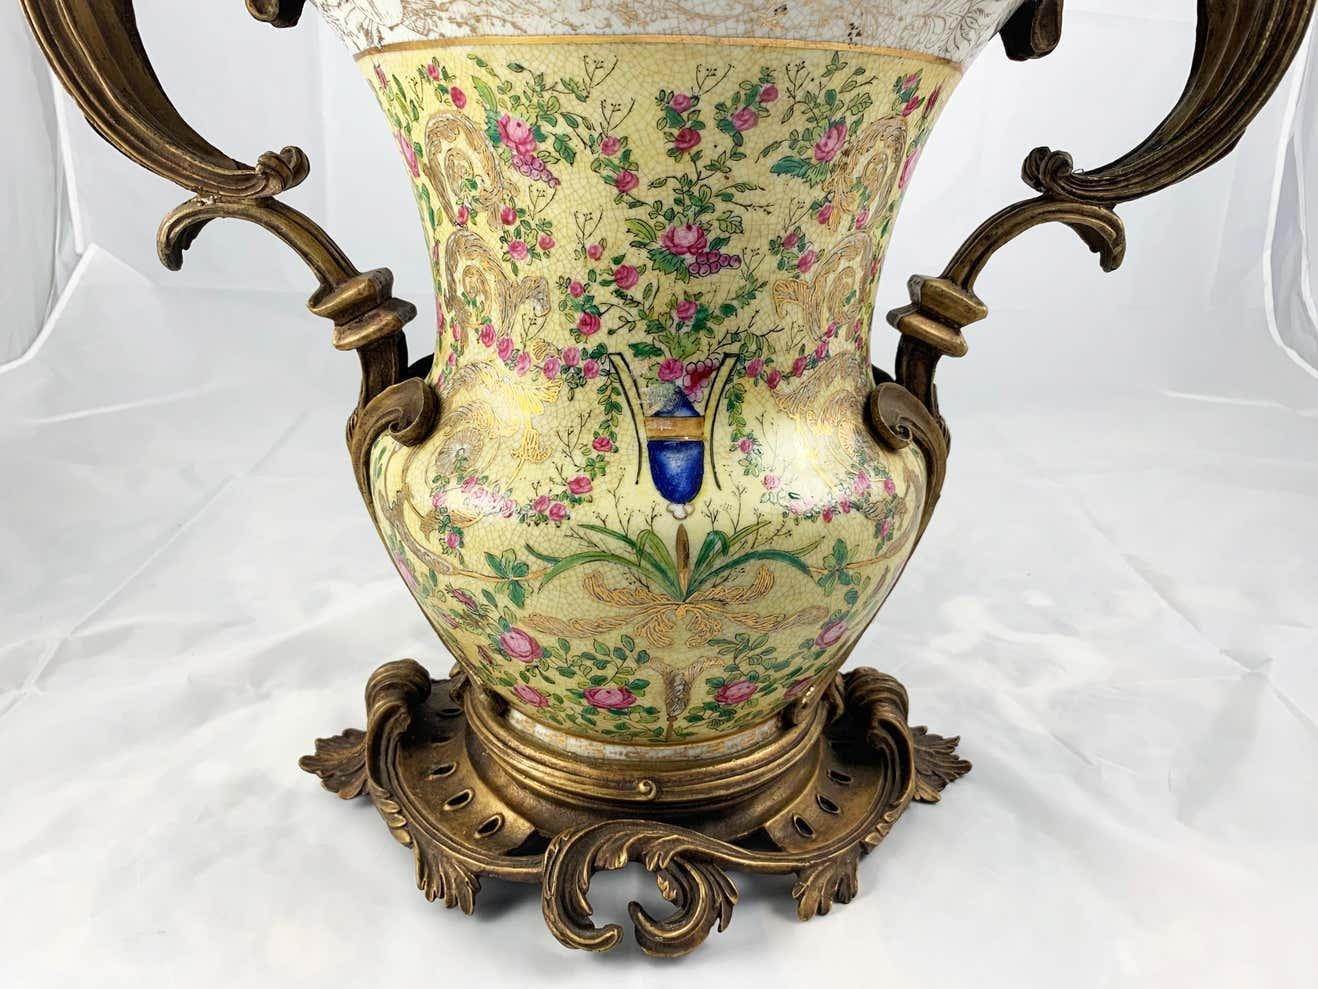 20th Century Pair of French Porcelain and Ormolu-Mounted Twin Handled Urns For Sale 5